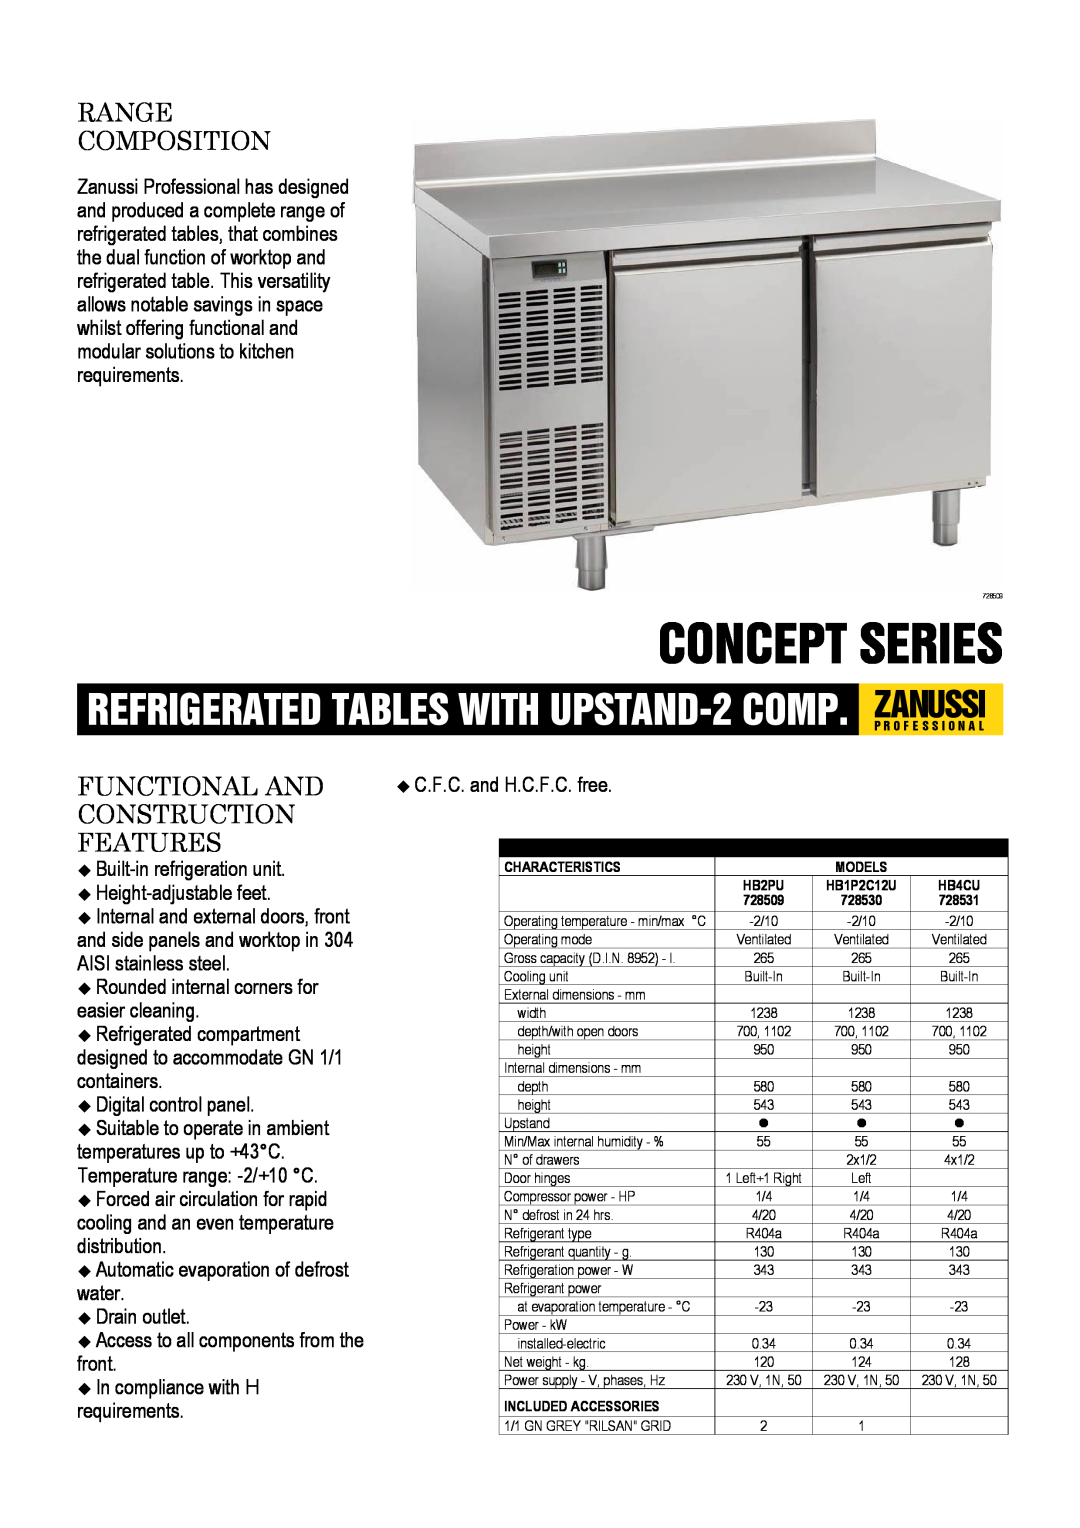 Zanussi 728531, 728509, 728530, HB1P2C12U dimensions Concept Series, Range Composition, Functional And Construction Features 